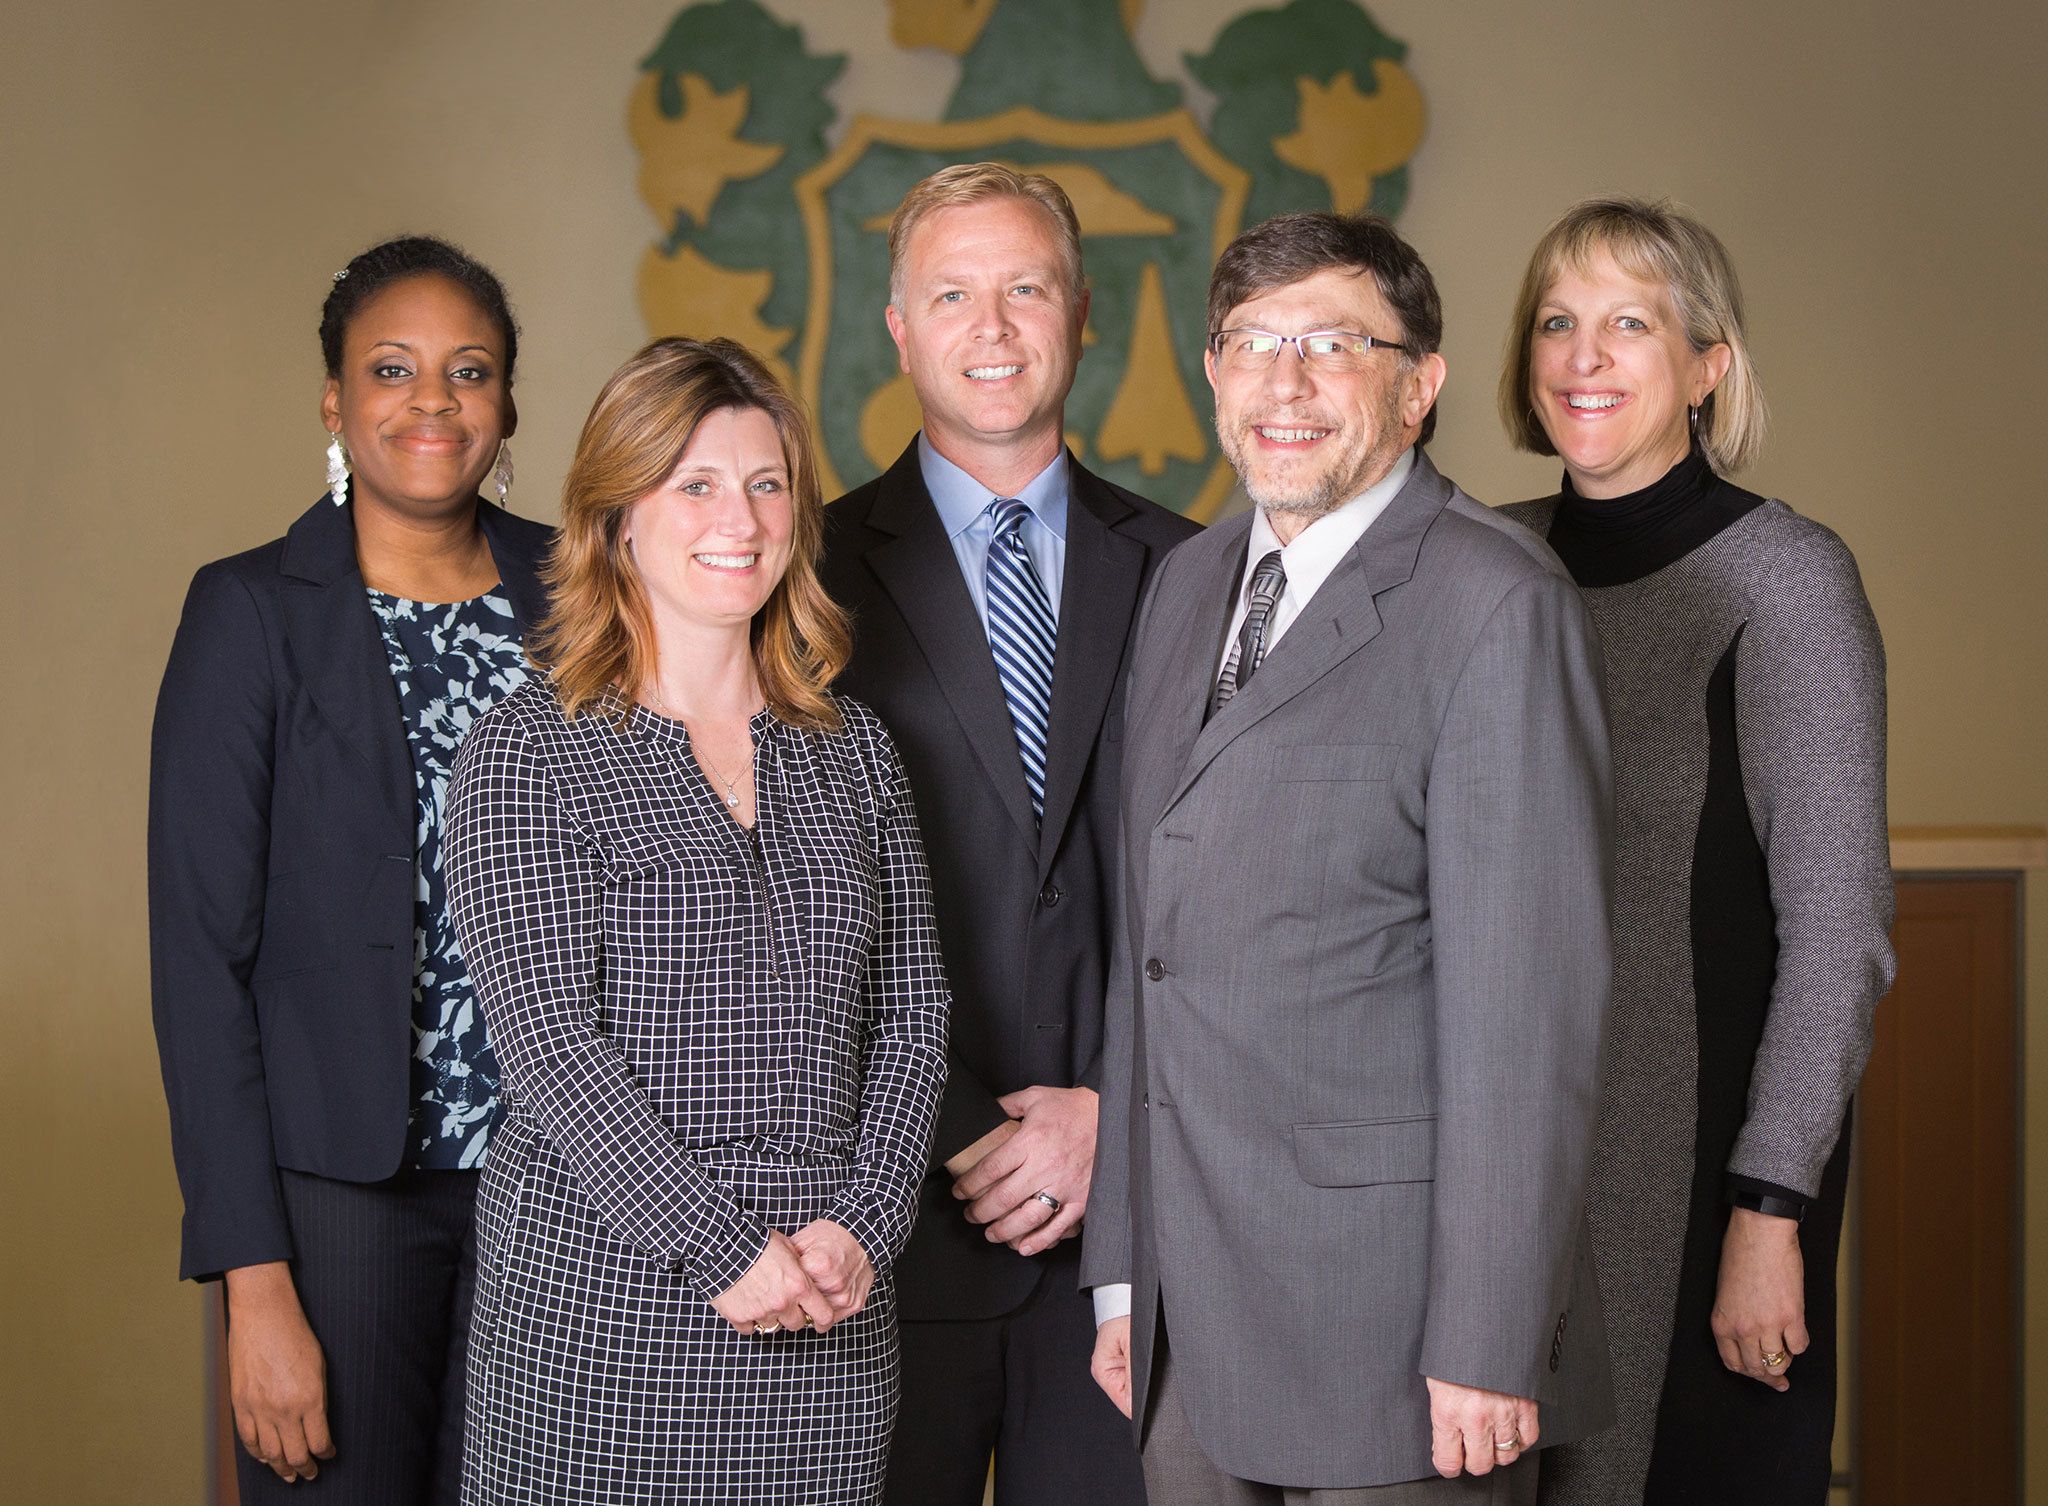 Auburn School District Board members are: Robyn Mulenga, Laurie Bishop, Ryan Van Quill, Ray Vefik and Anne Baunach. COURTESY PHOTO